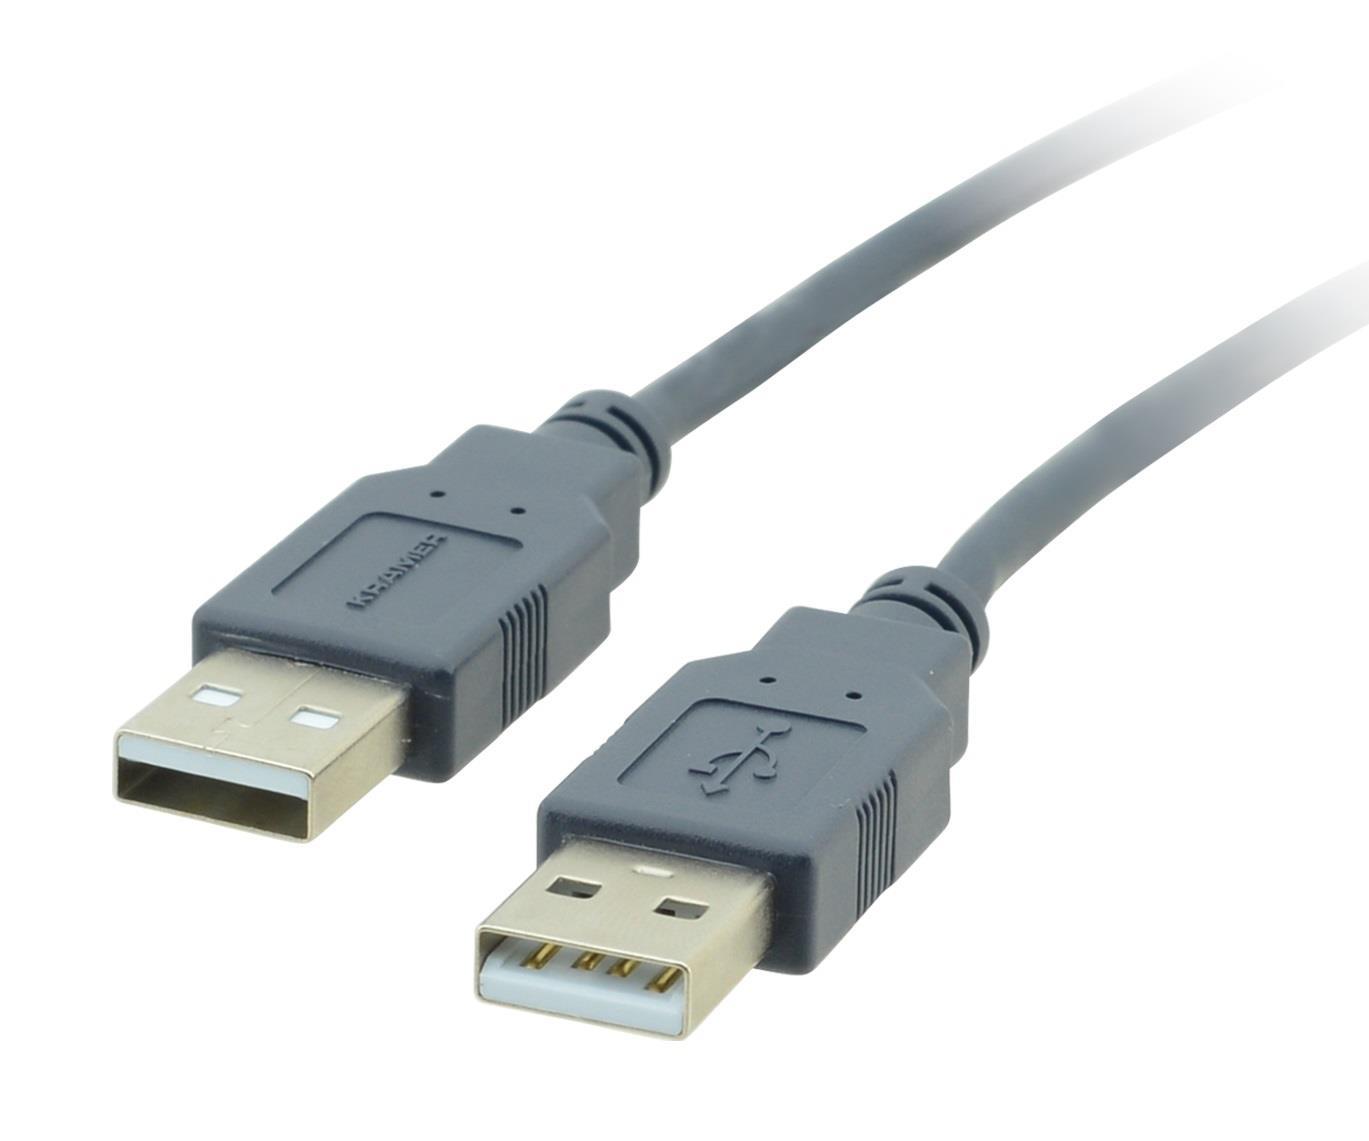 KRAMER C-USB/AA-3 USB 2.0 A(M) TO A(M) CABLE-3FT 0.9M